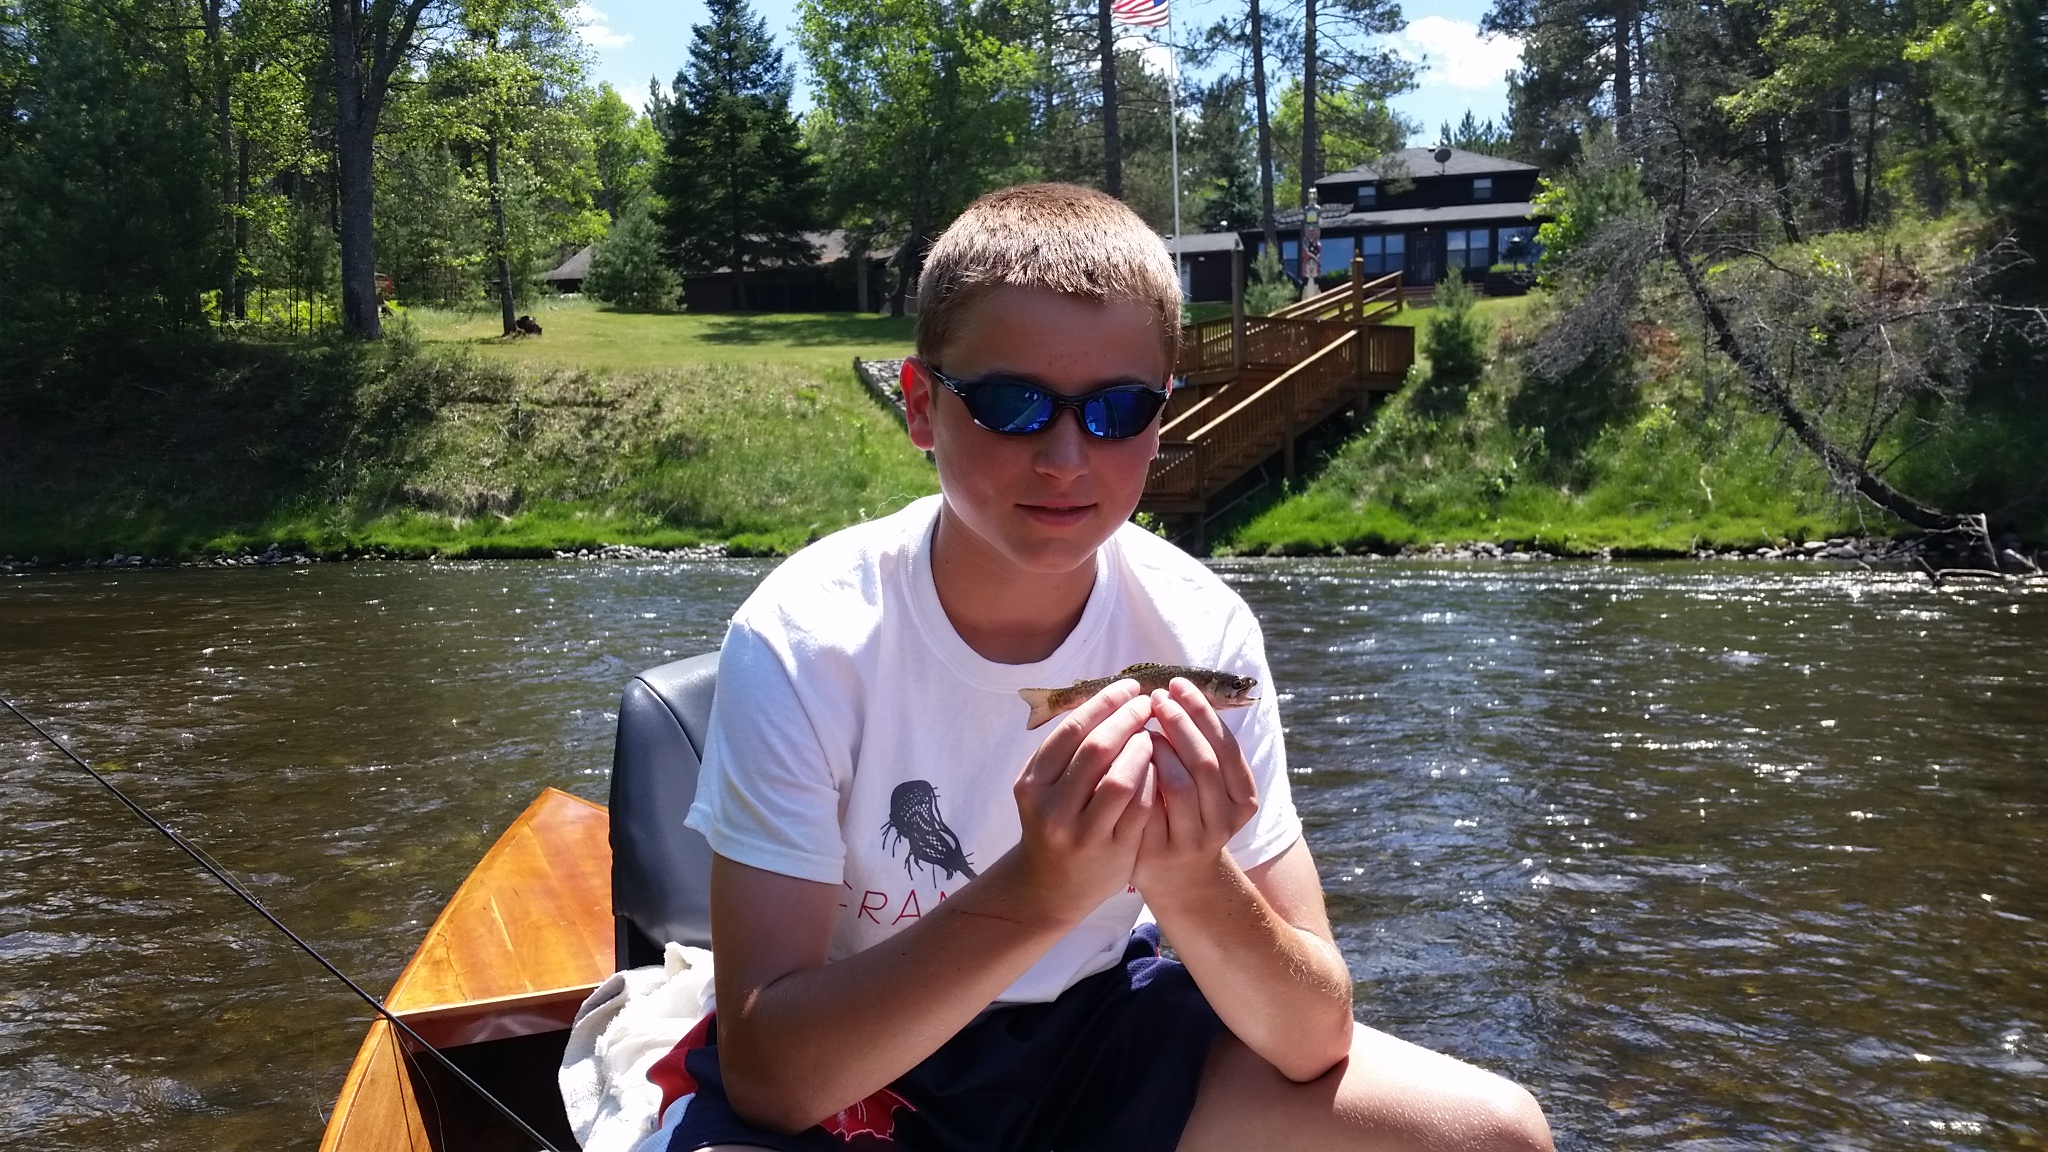 Charlie Thomson with his first trout ever! Caught while on a float with his father this past Saturday. Nice Brookie Charlie, way to go! 